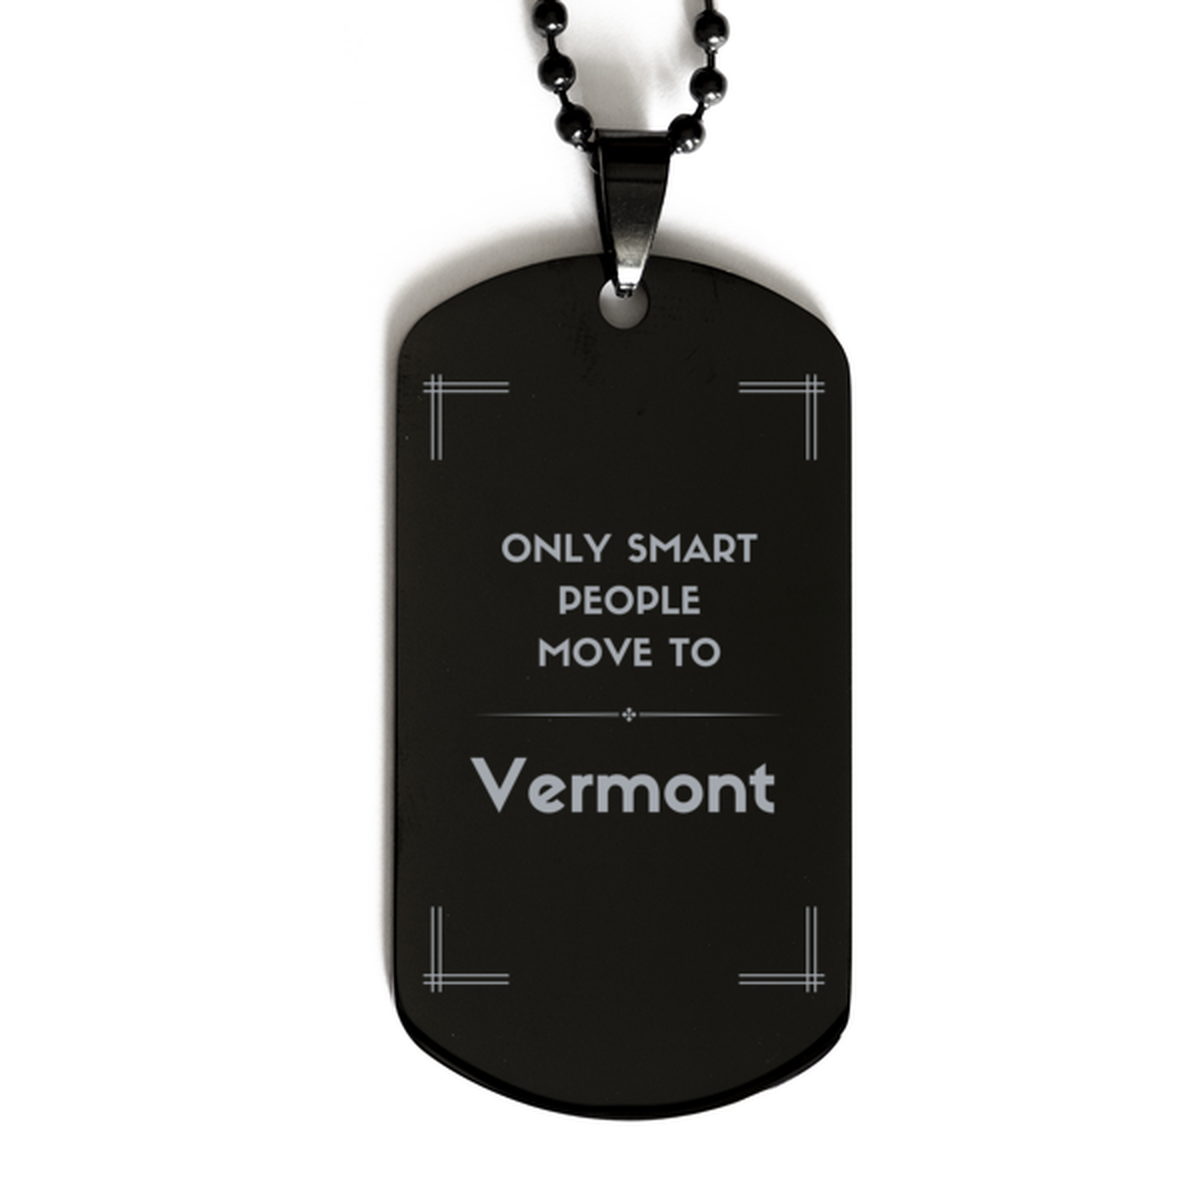 Only smart people move to Vermont Black Dog Tag, Gag Gifts For Vermont, Move to Vermont Gifts for Friends Coworker Funny Saying Quote